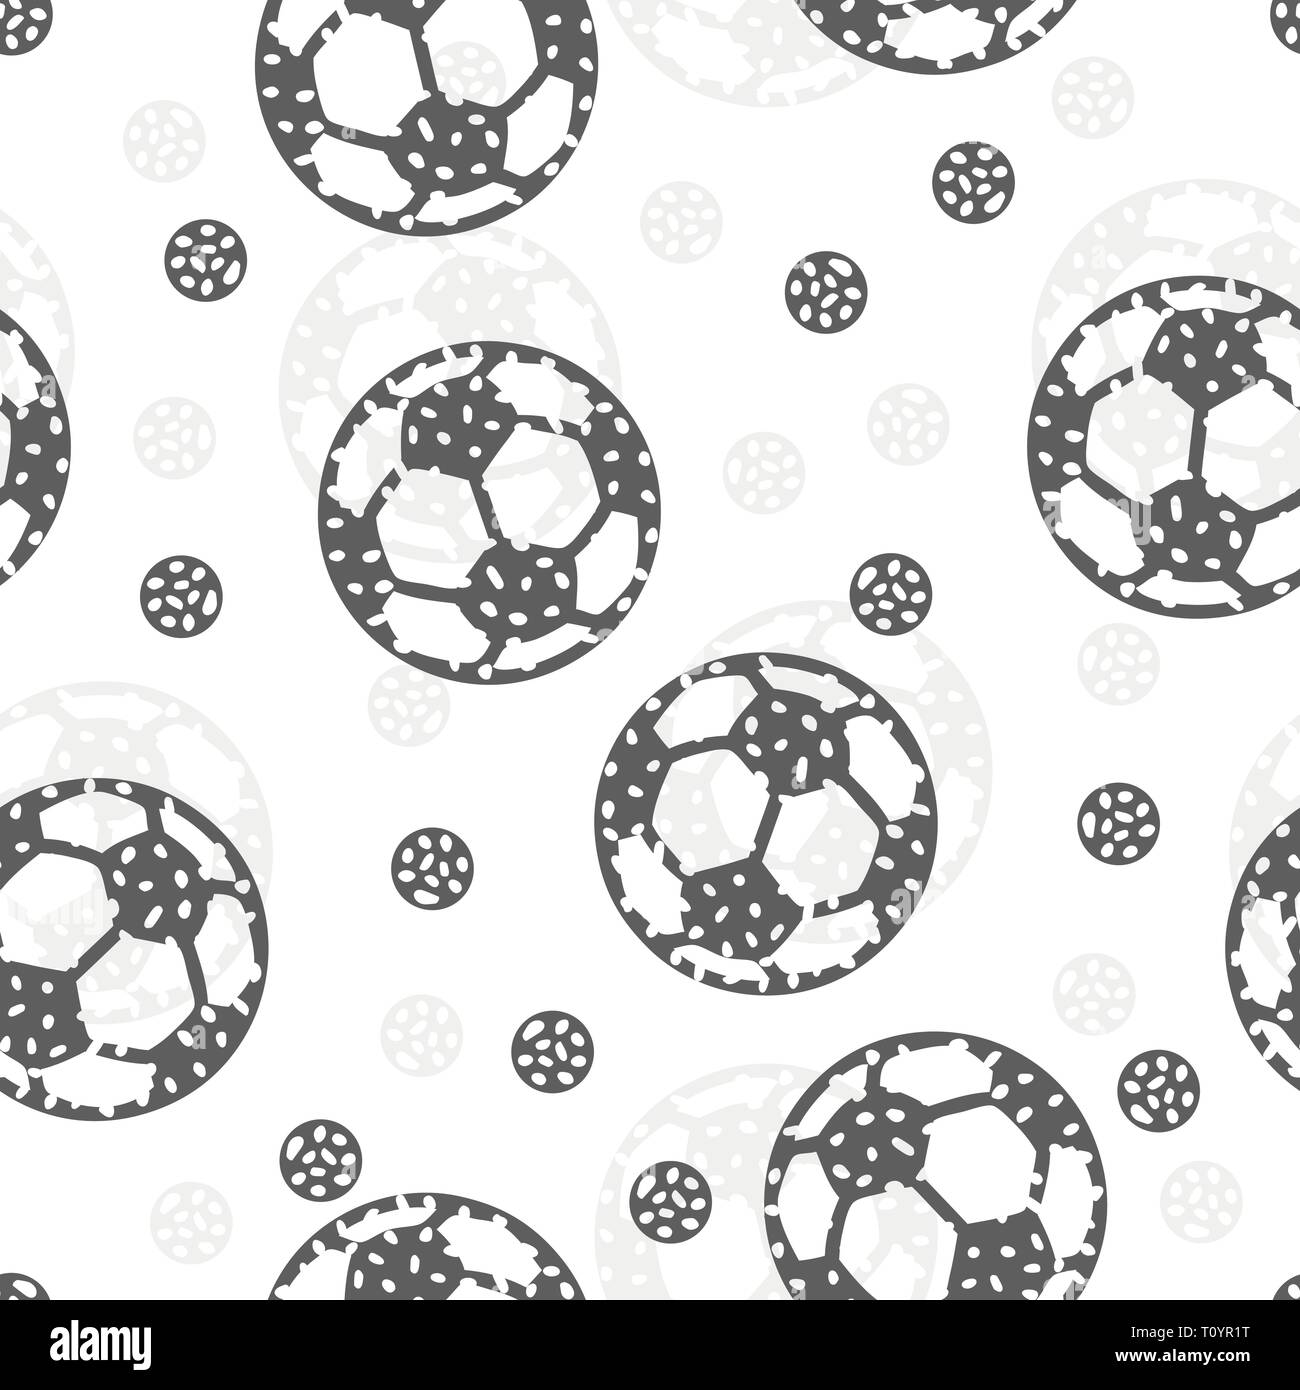 Seamless pattern with soccer ball Abstract background Stock Vector